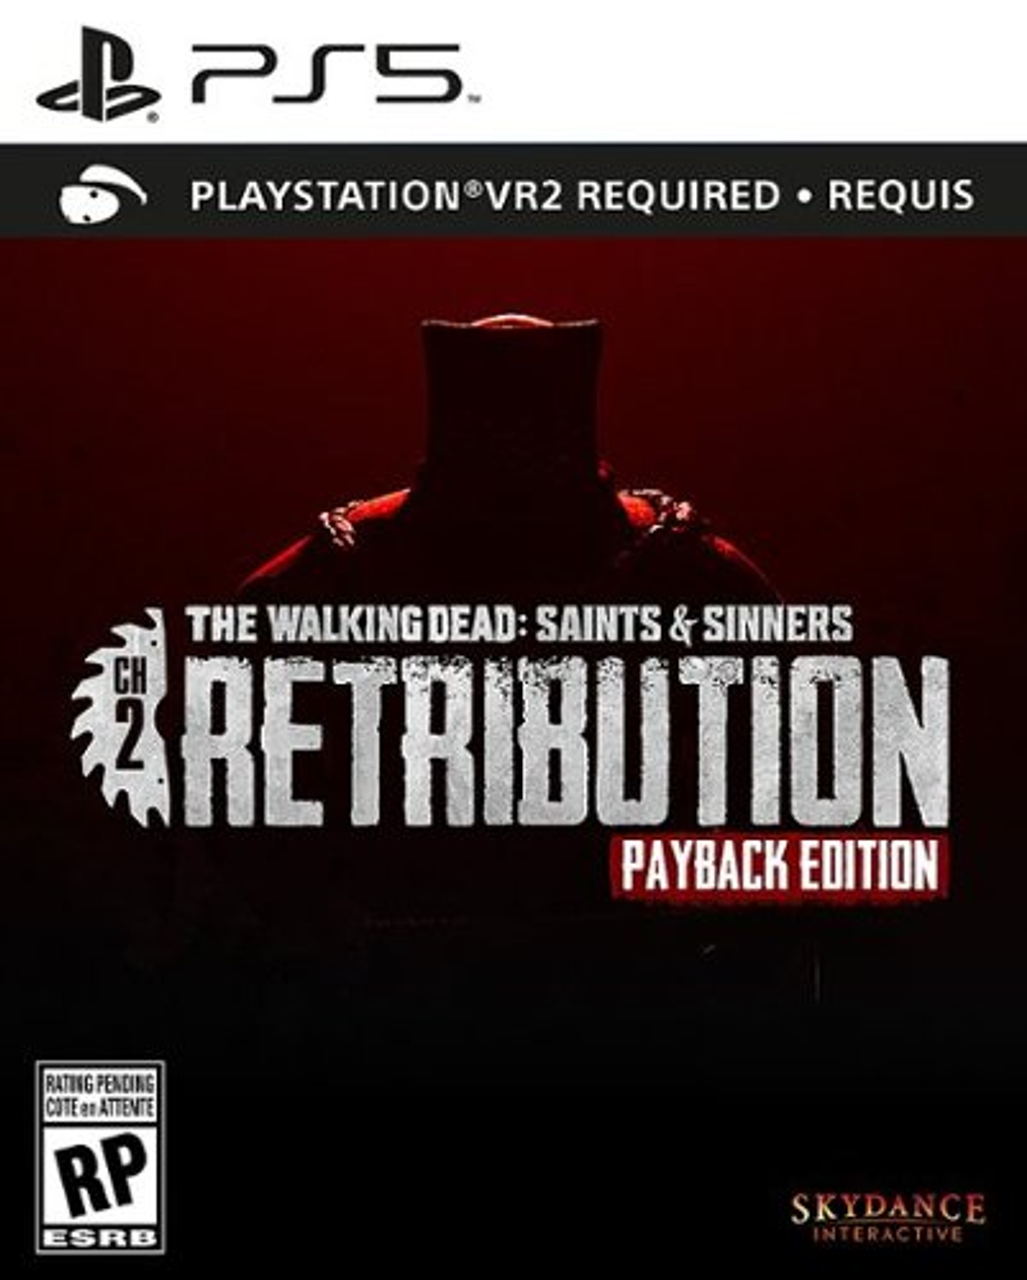 The Walking Dead: Saints & Sinners - Chapter 2: Retribution - Payback Edition - PlayStation 5